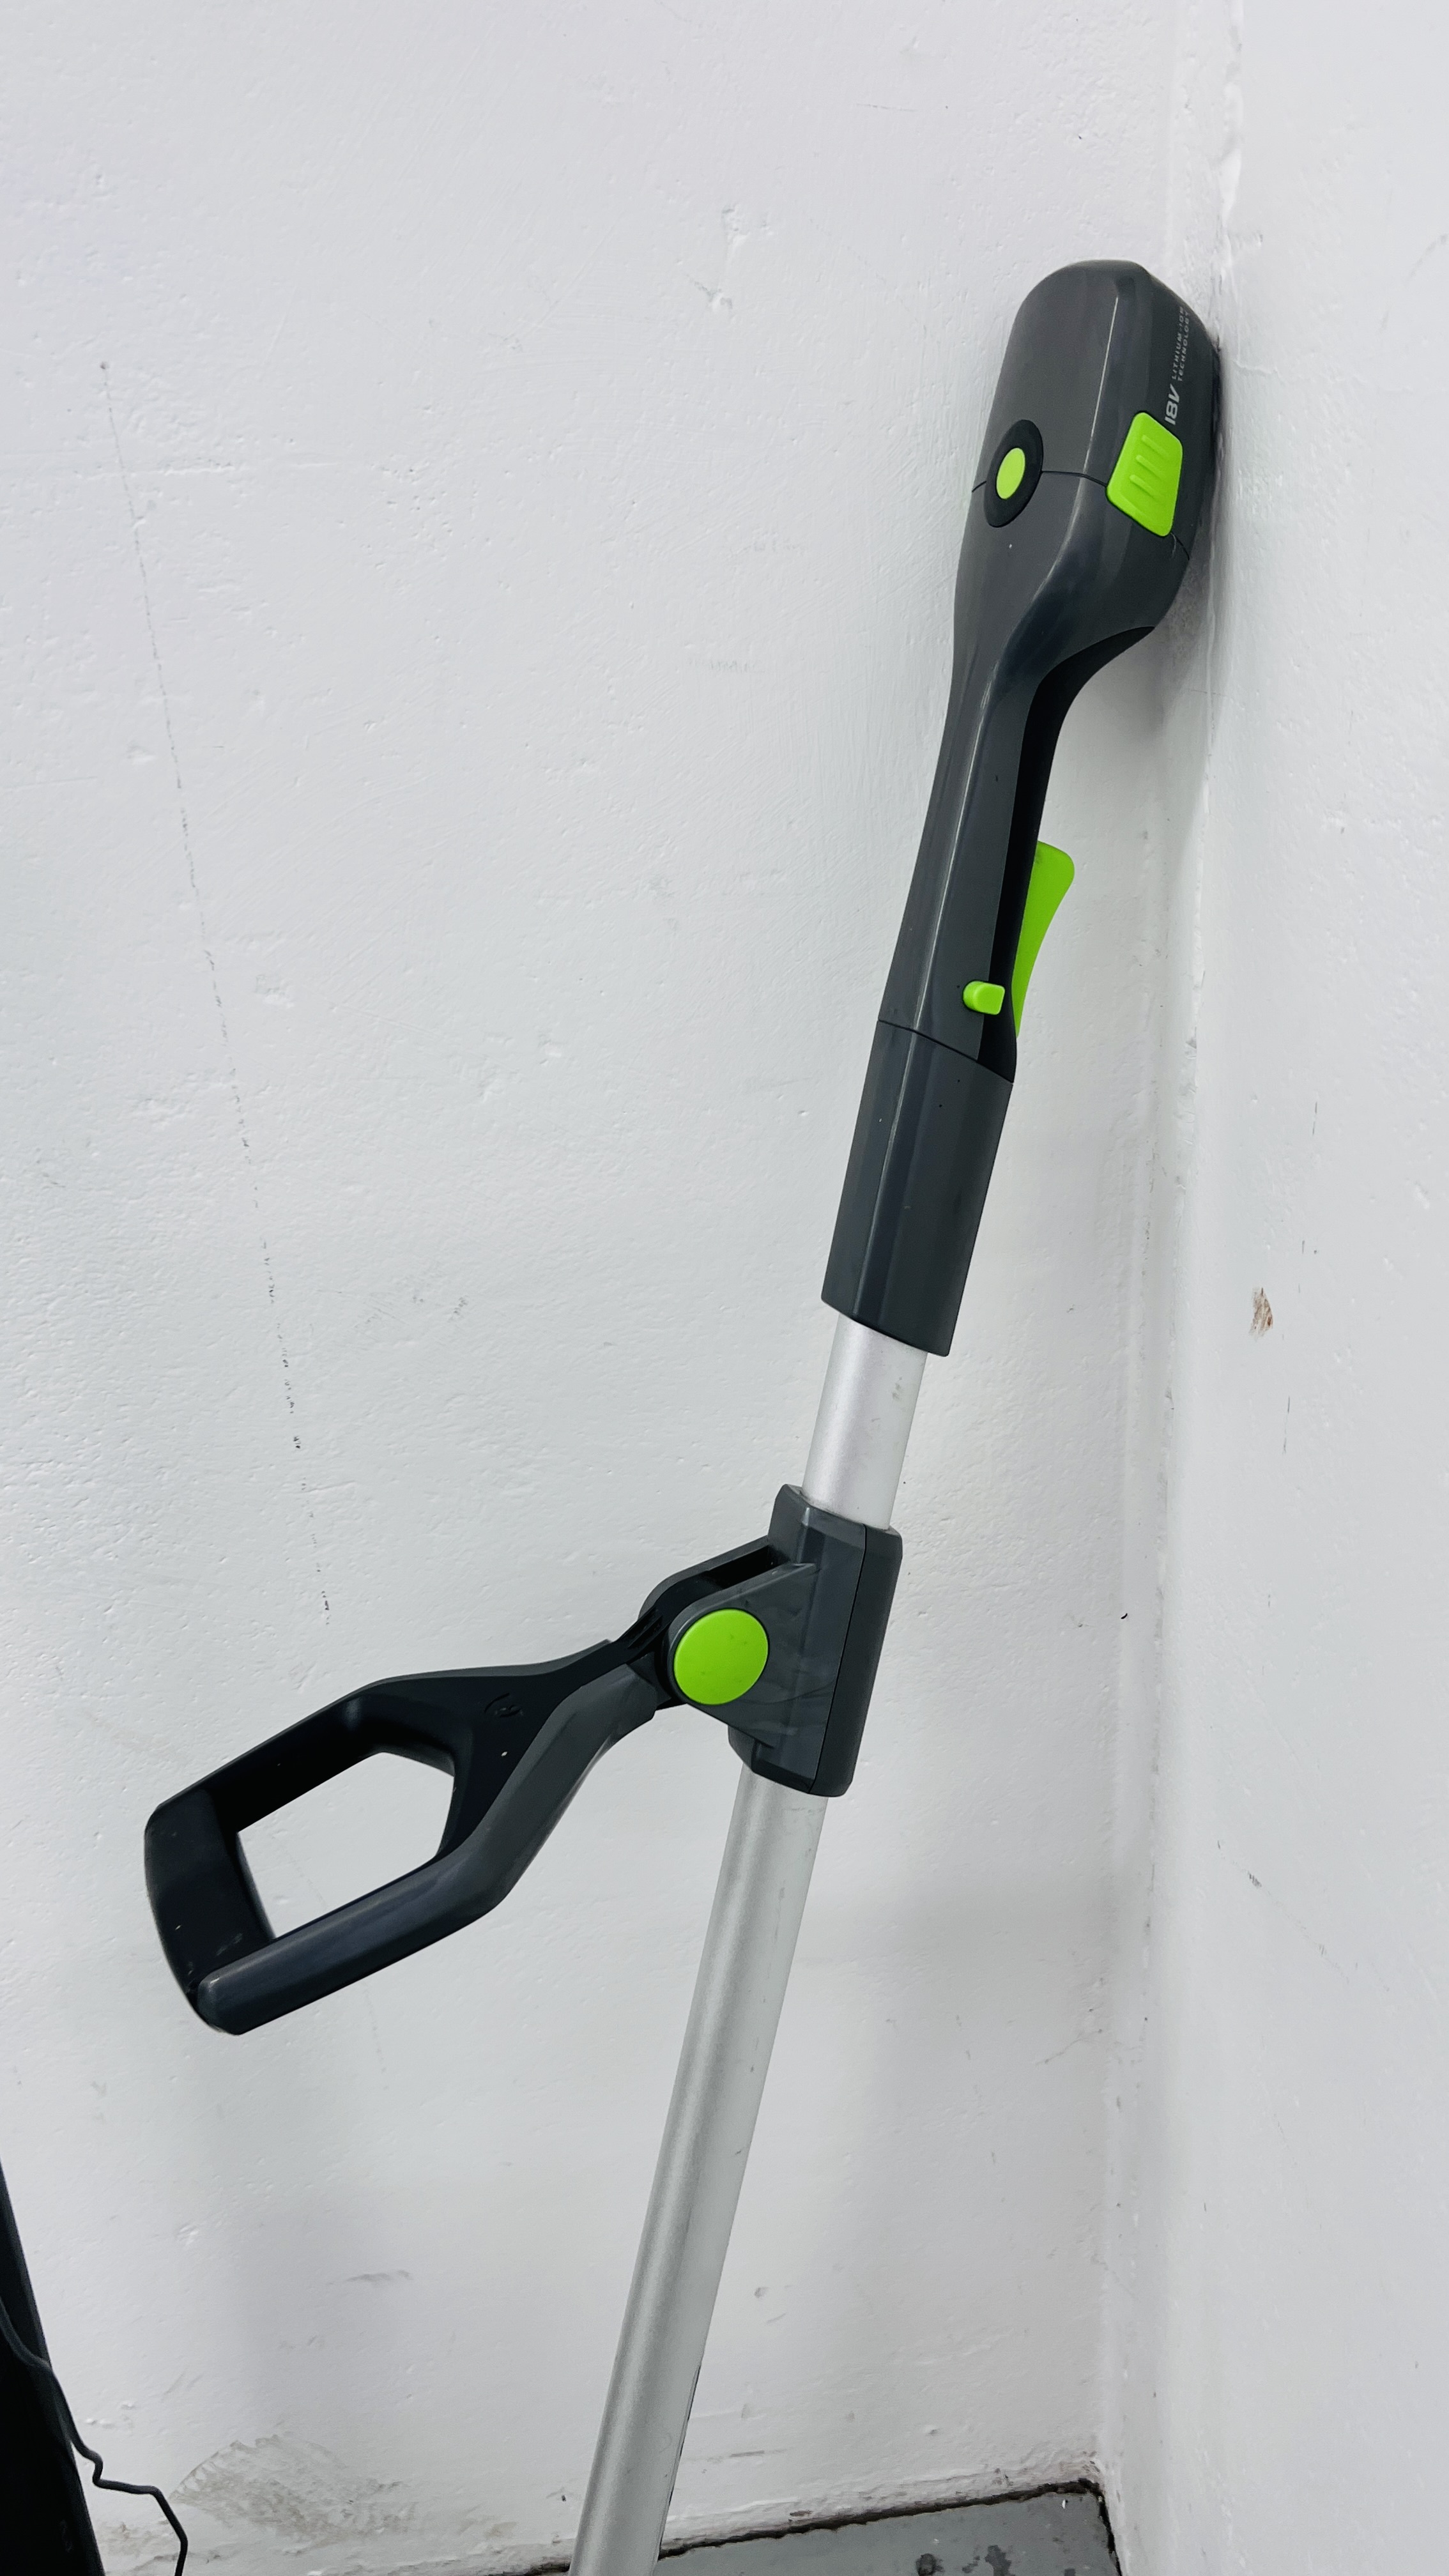 A GTECH AIR RAM CORDLESS VACUUM CLEANER WITH CHARGER ALONG WITH A GTECH CORDLESS STRIMMER (NO - Image 2 of 5